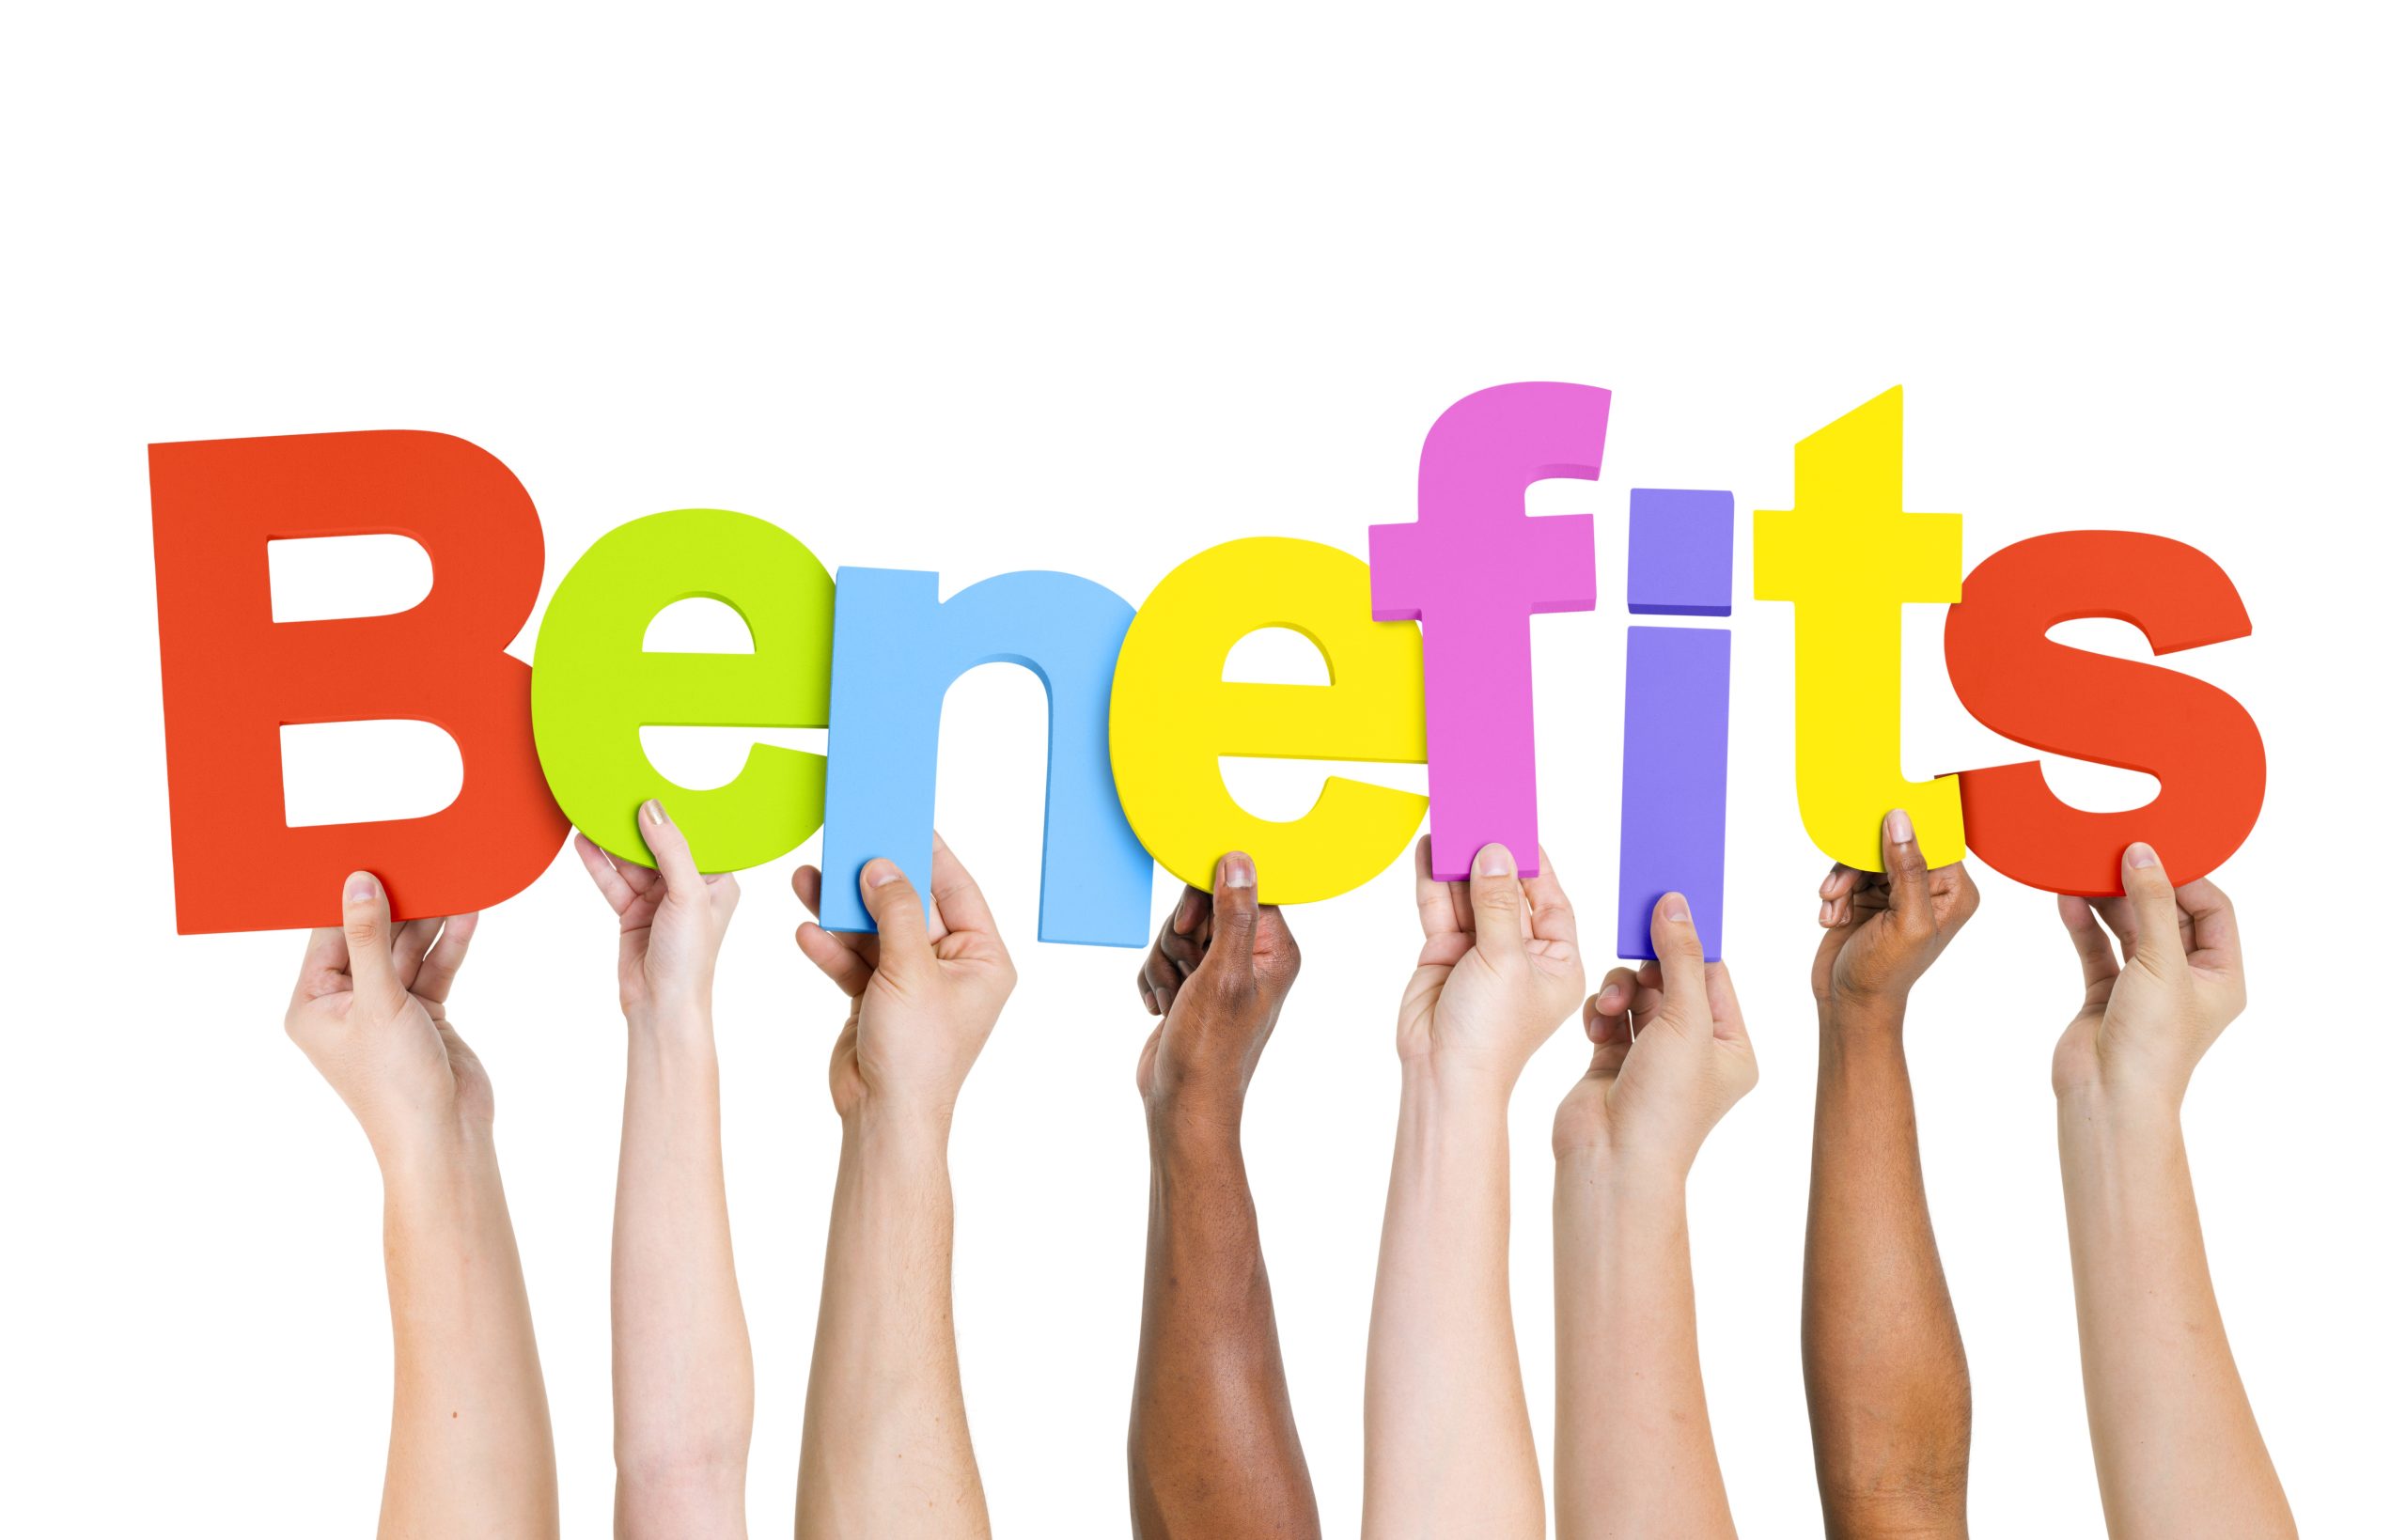 Employee benefits renewal is simpler than you think – here’s the key